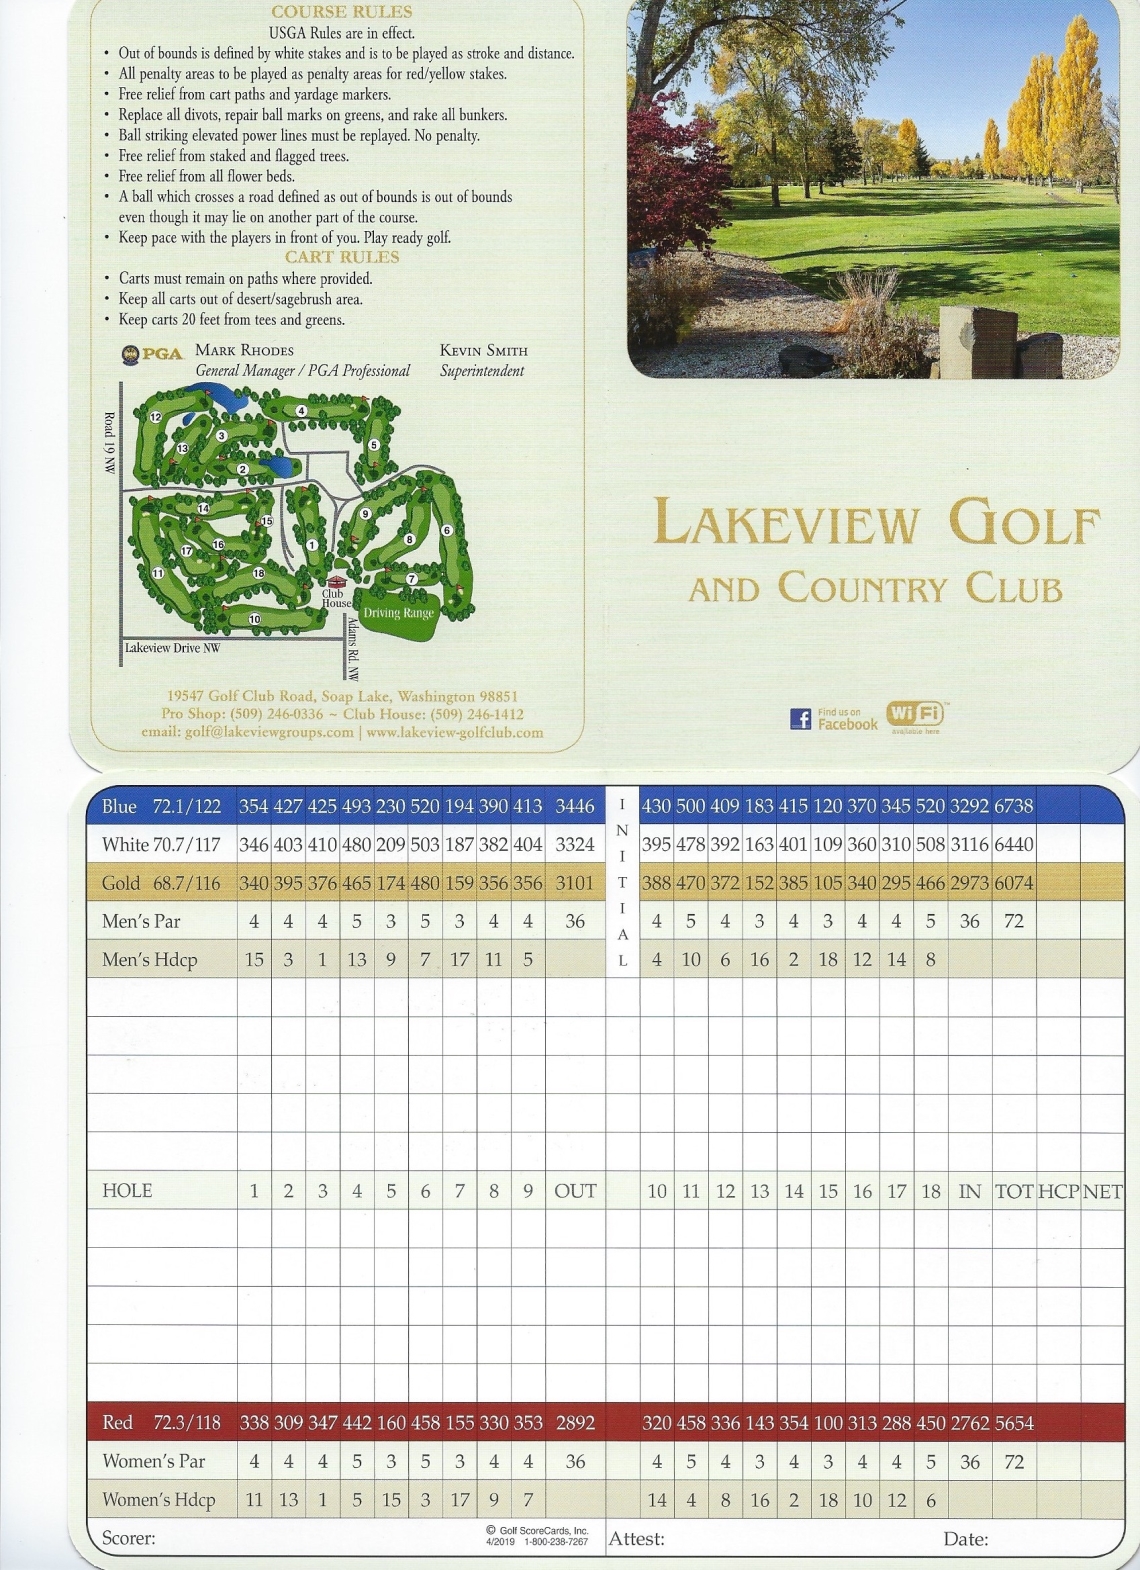 Lakeview Golf & Country Club